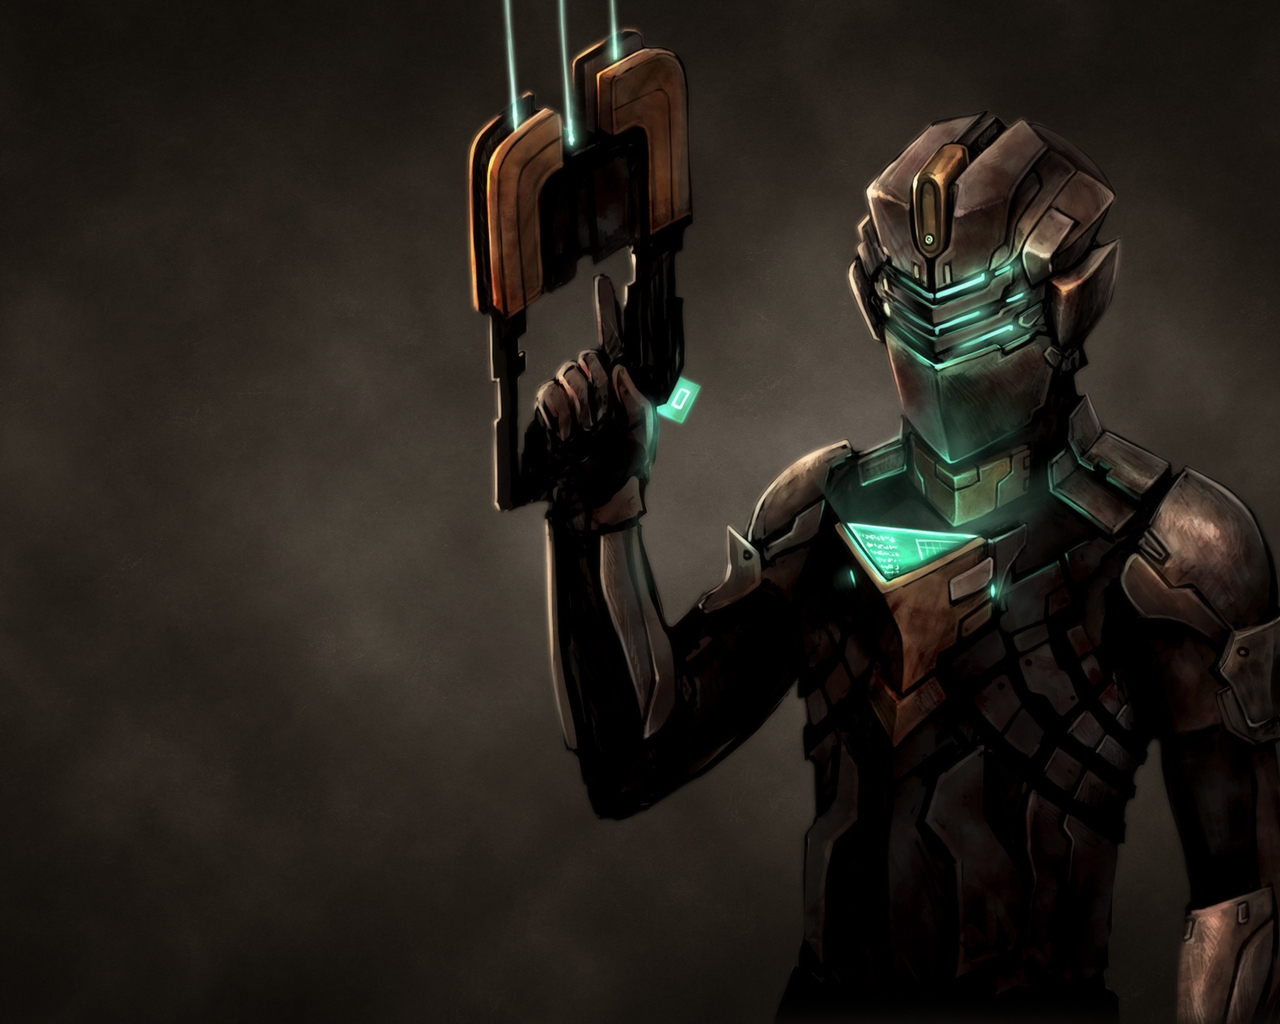 Dead Space Suit for 1280 x 1024 resolution